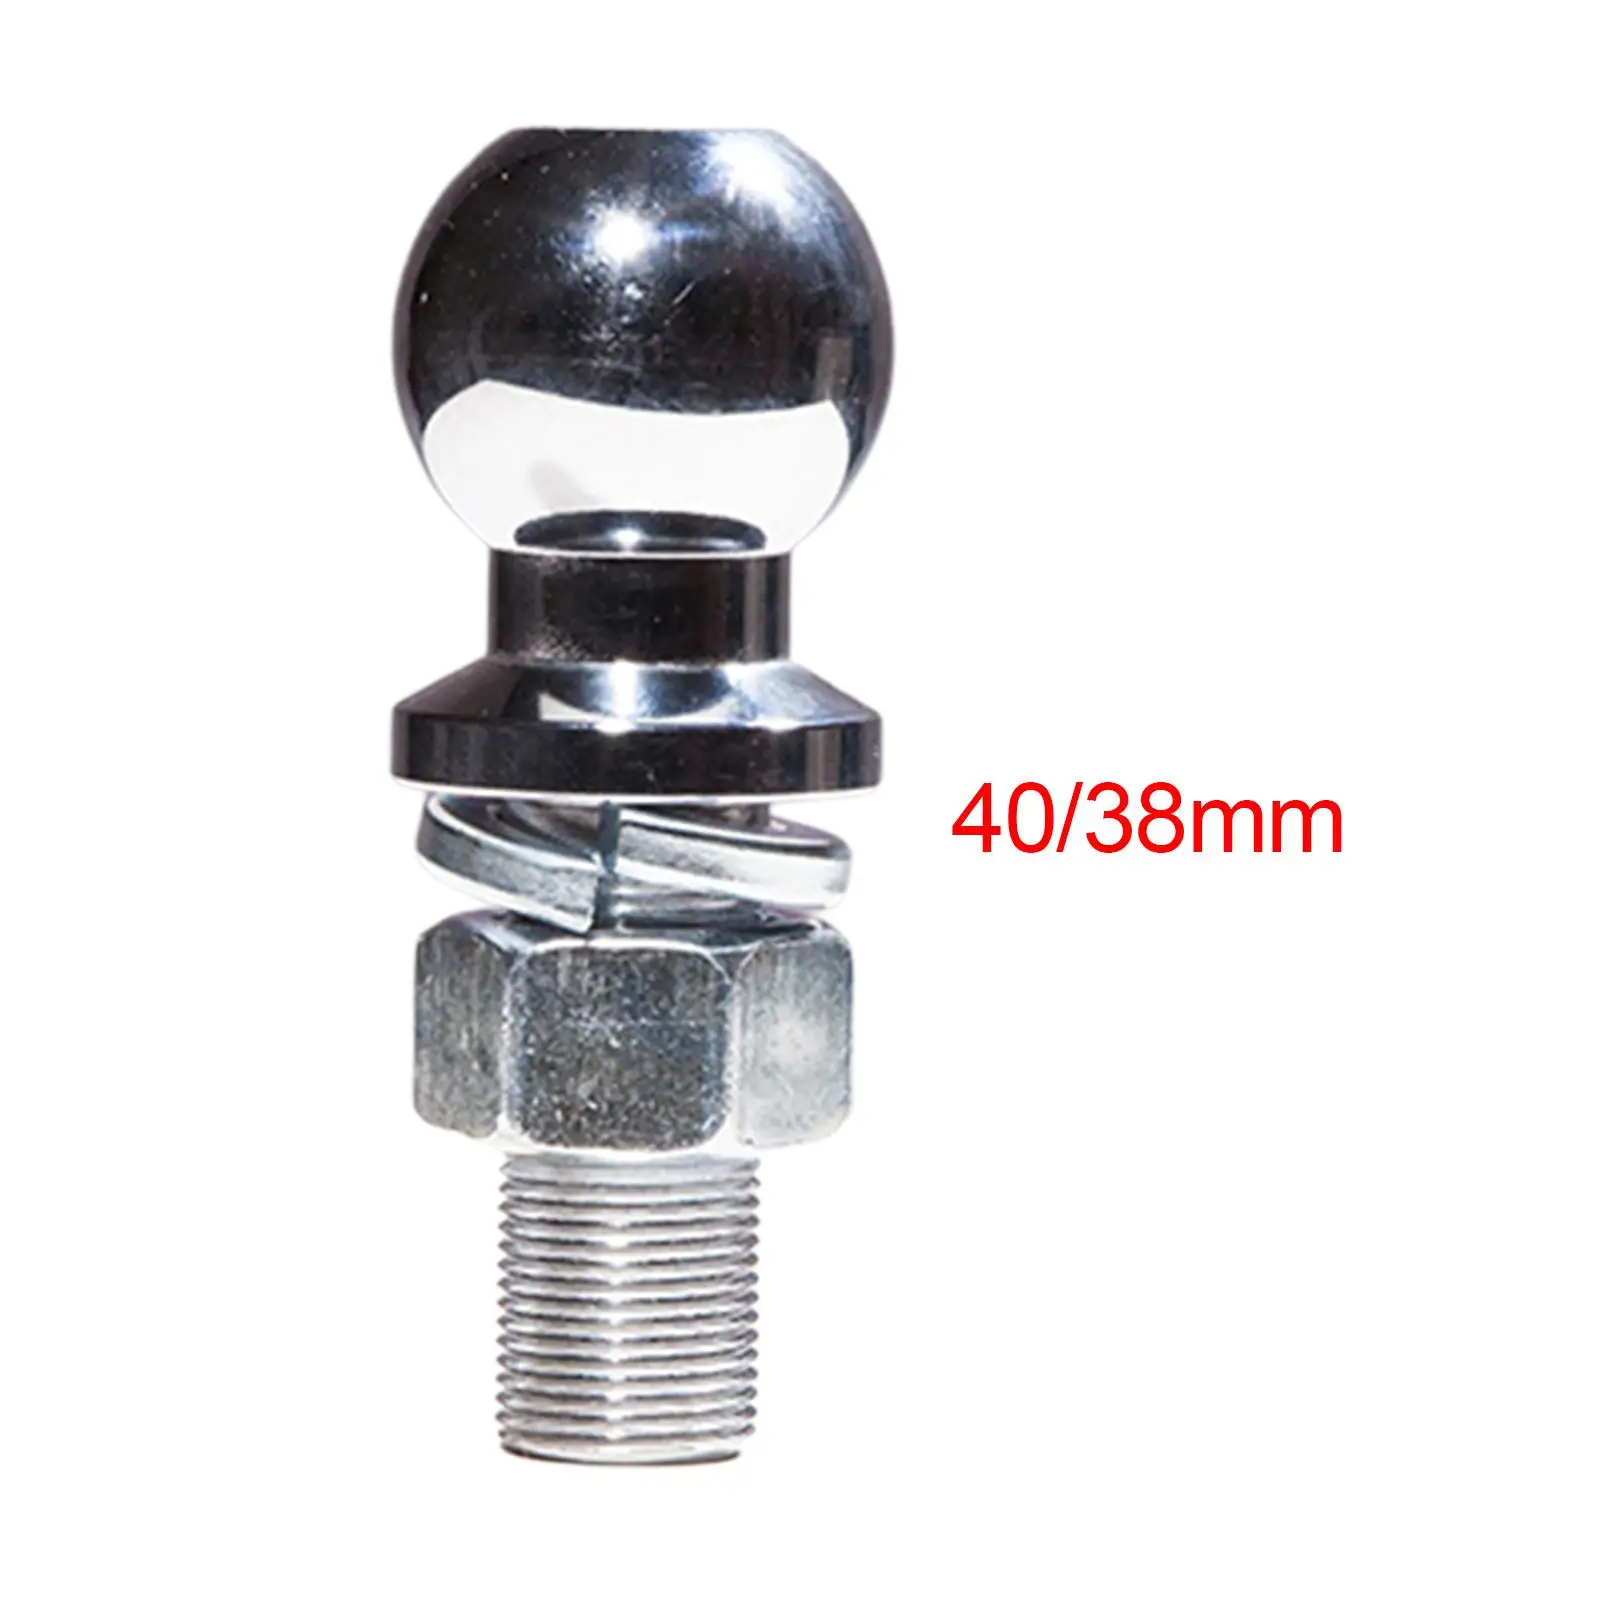 Trailer Hitch Ball 2 inch Spare Parts Portable Chrome Trailer Connector Ball Head for Vehicle Beach Motorcycle RV